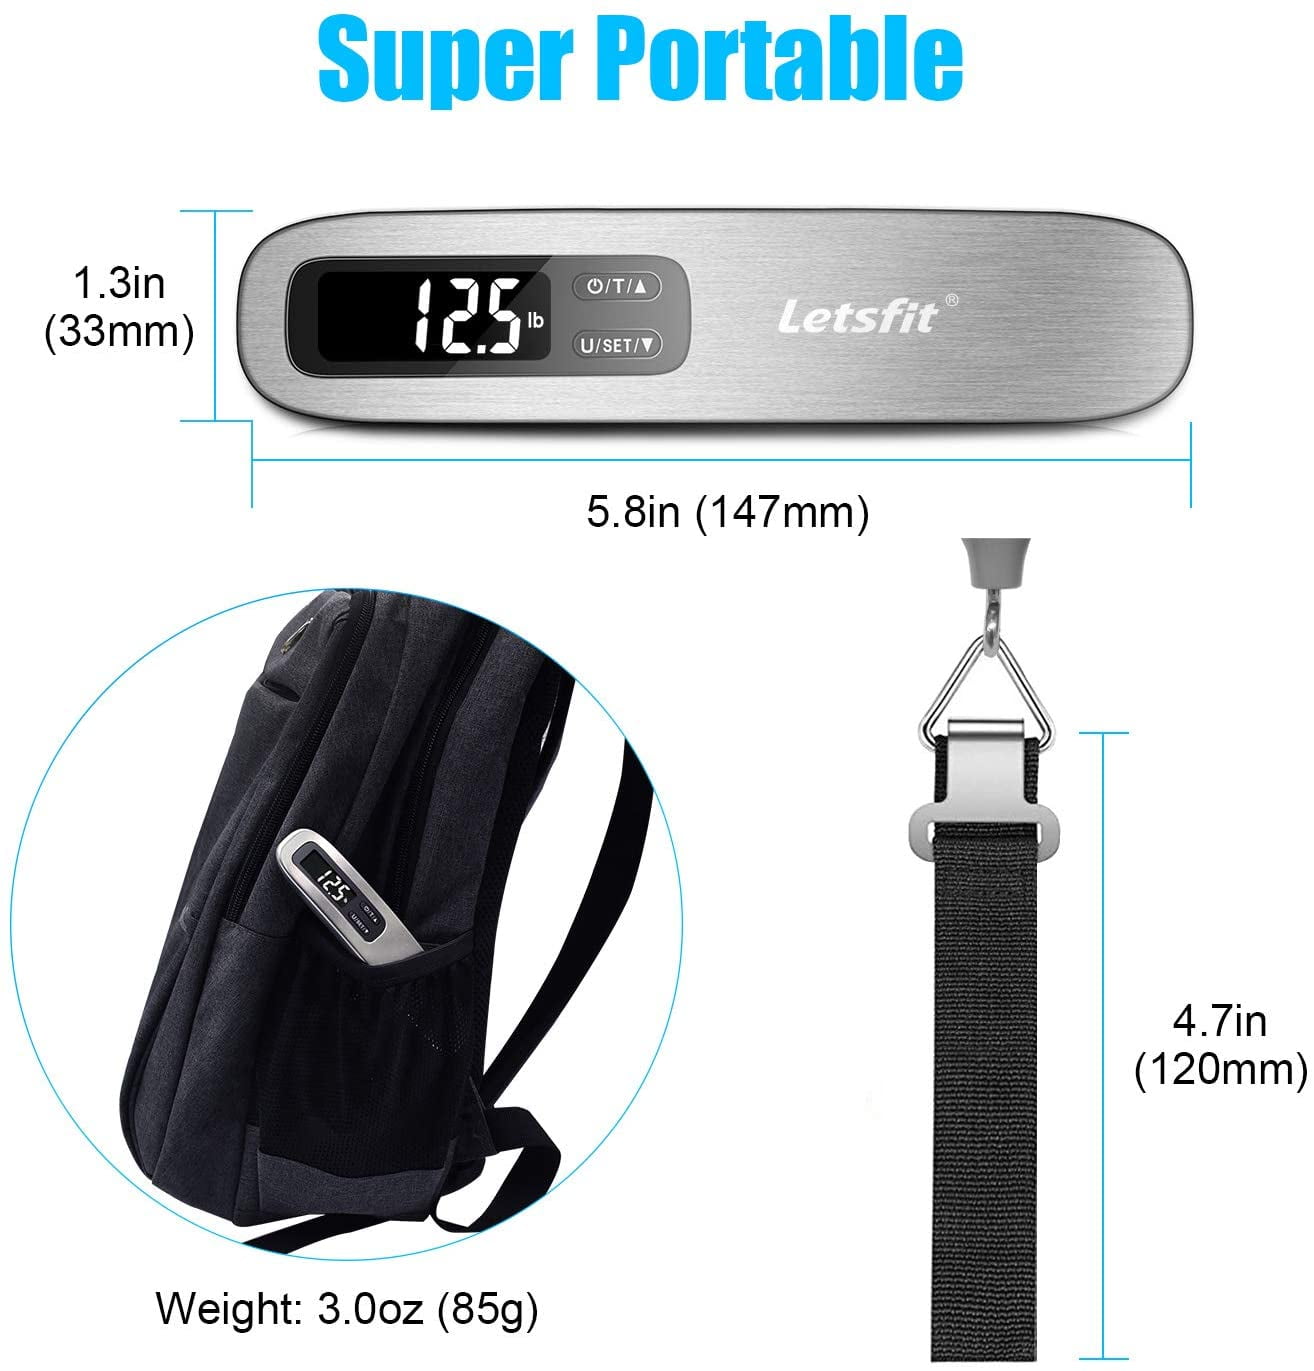 110lbs Hanging Baggage Scale with Backlit LCD Display Portable Suitcase Weighing Scale Strong Straps for Travelers Letsfit Digital Luggage Scale Travel Luggage Weight Scale with Hook 